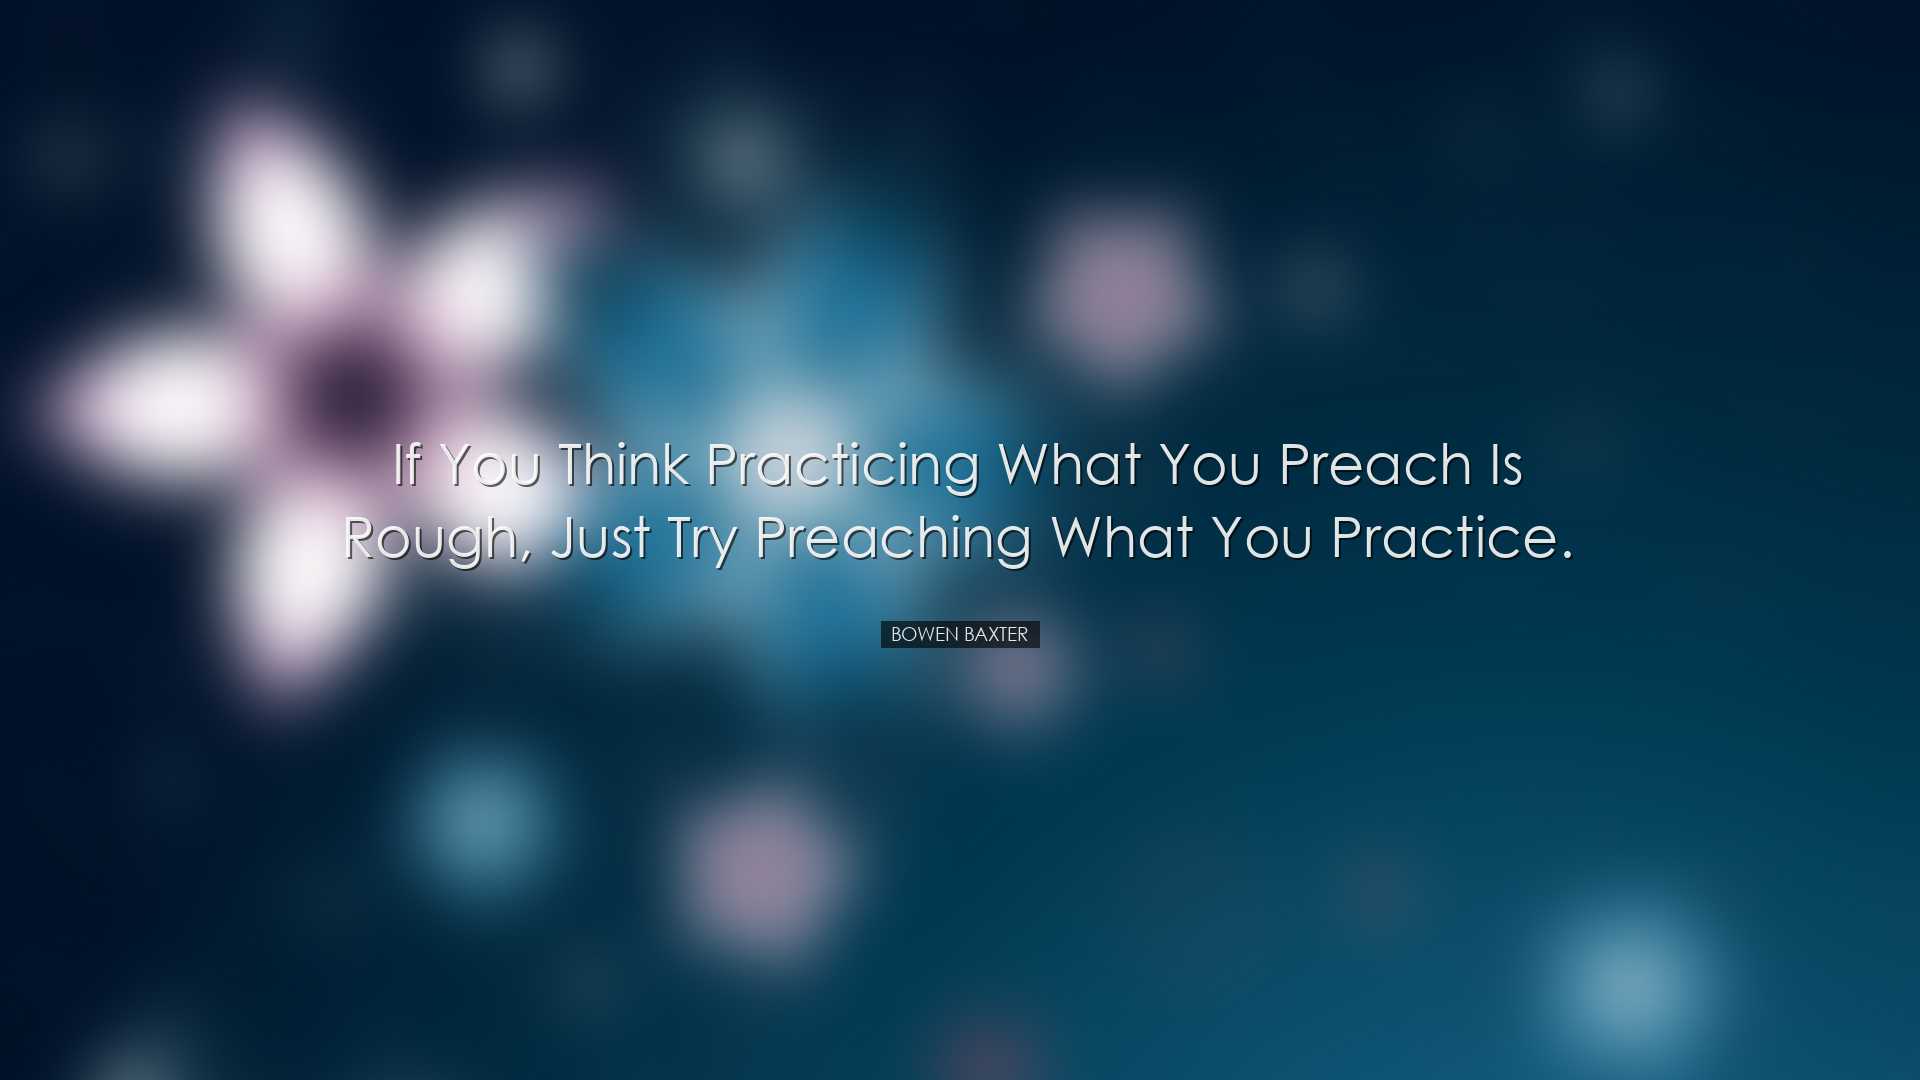 If you think practicing what you preach is rough, just try preachi